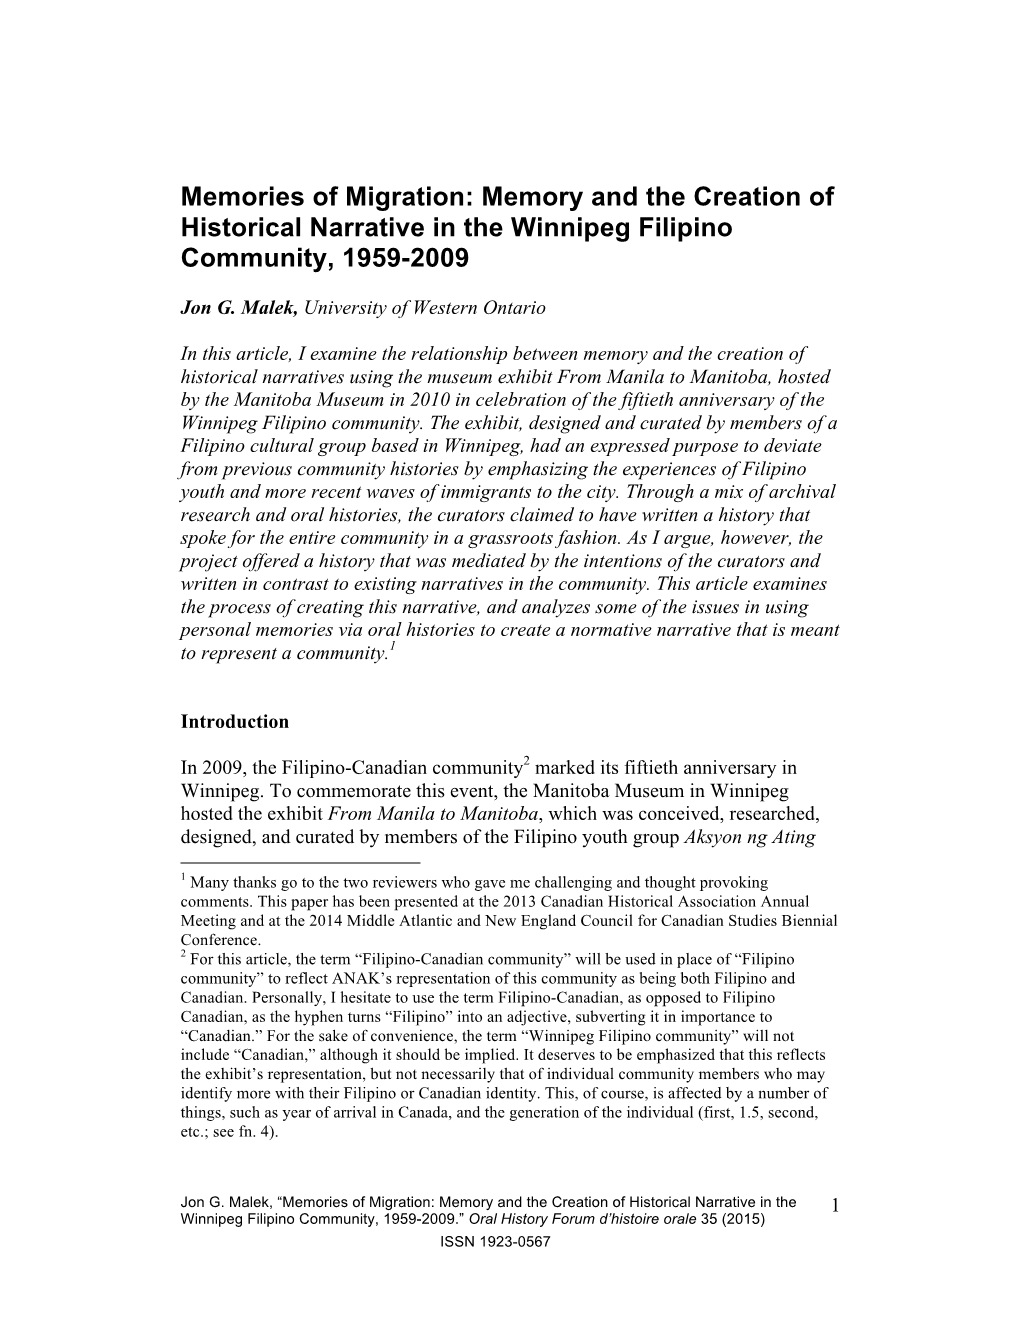 Memory and the Creation of Historical Narrative in the Winnipeg Filipino Community, 1959-2009